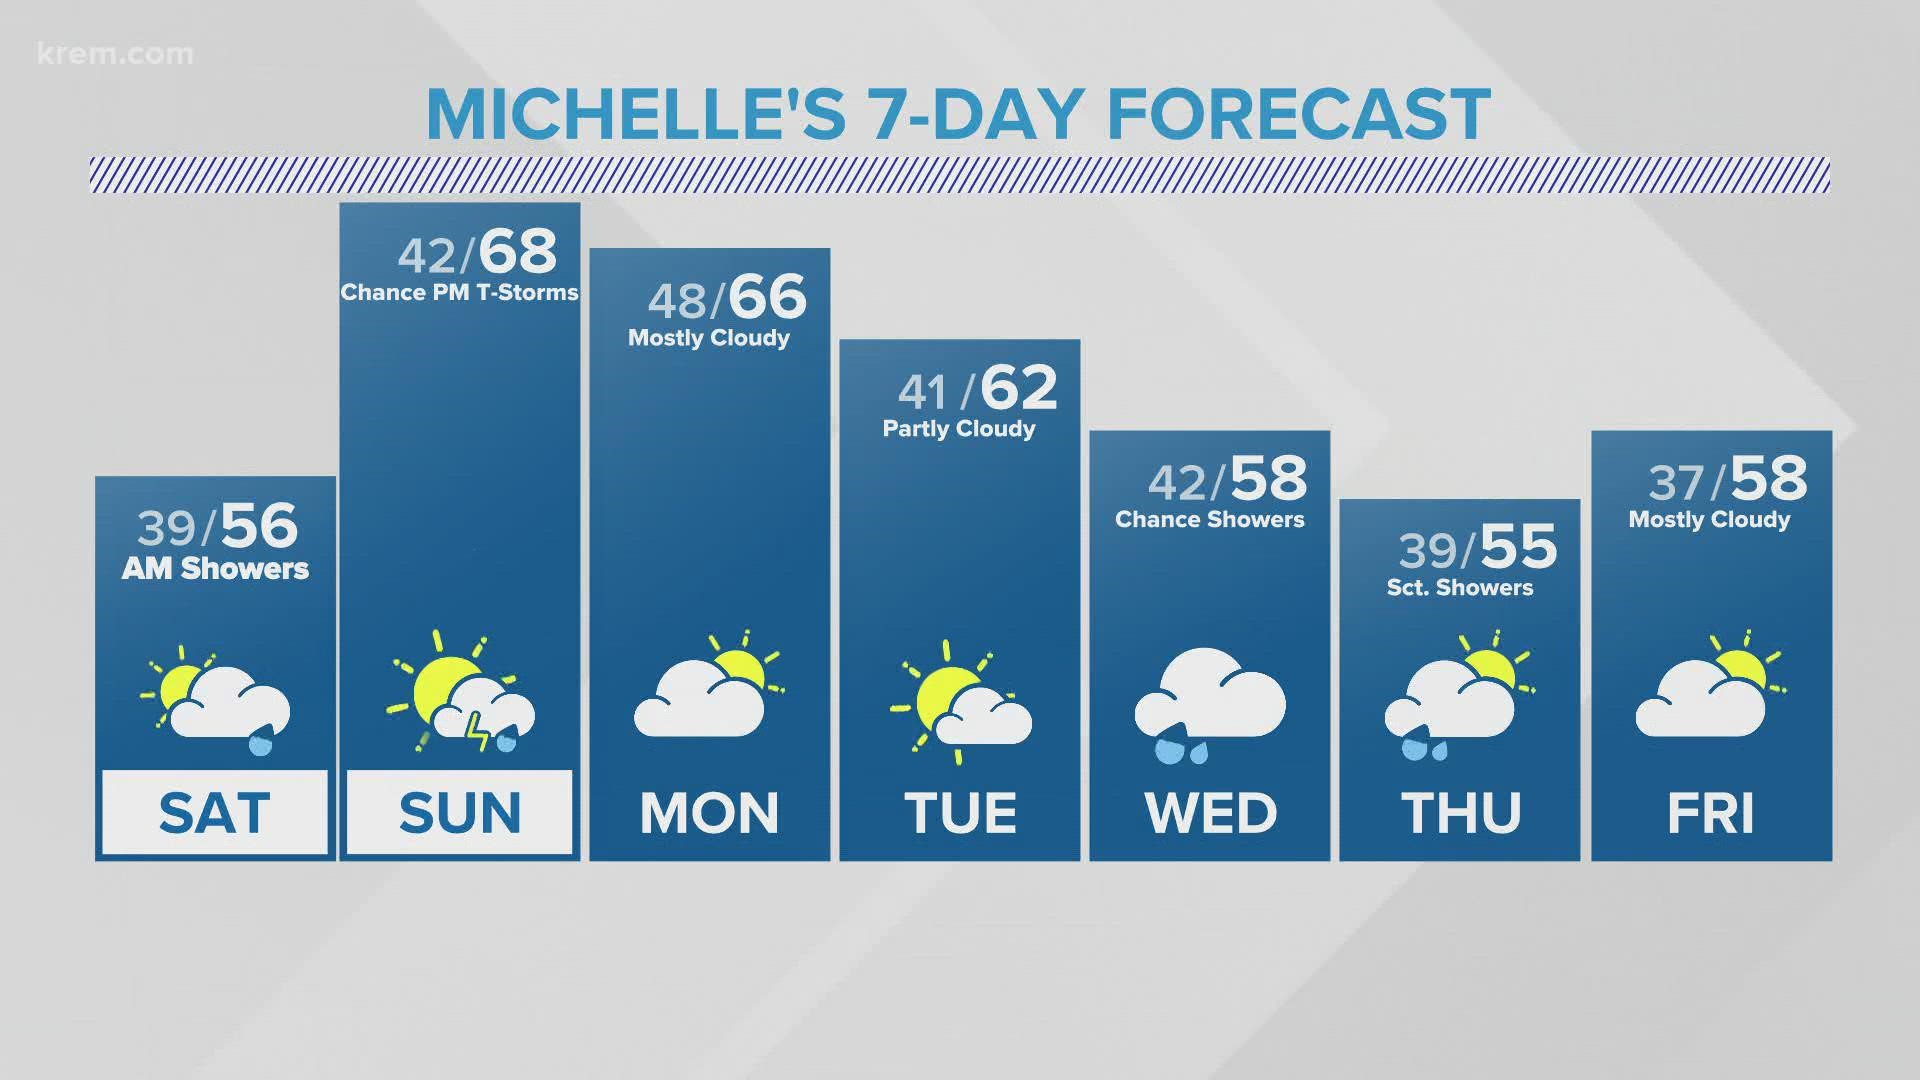 KREM 2 Meteorologist Michelle Boss has the 7-day forecast on May 13, 2022 at 10 p.m.